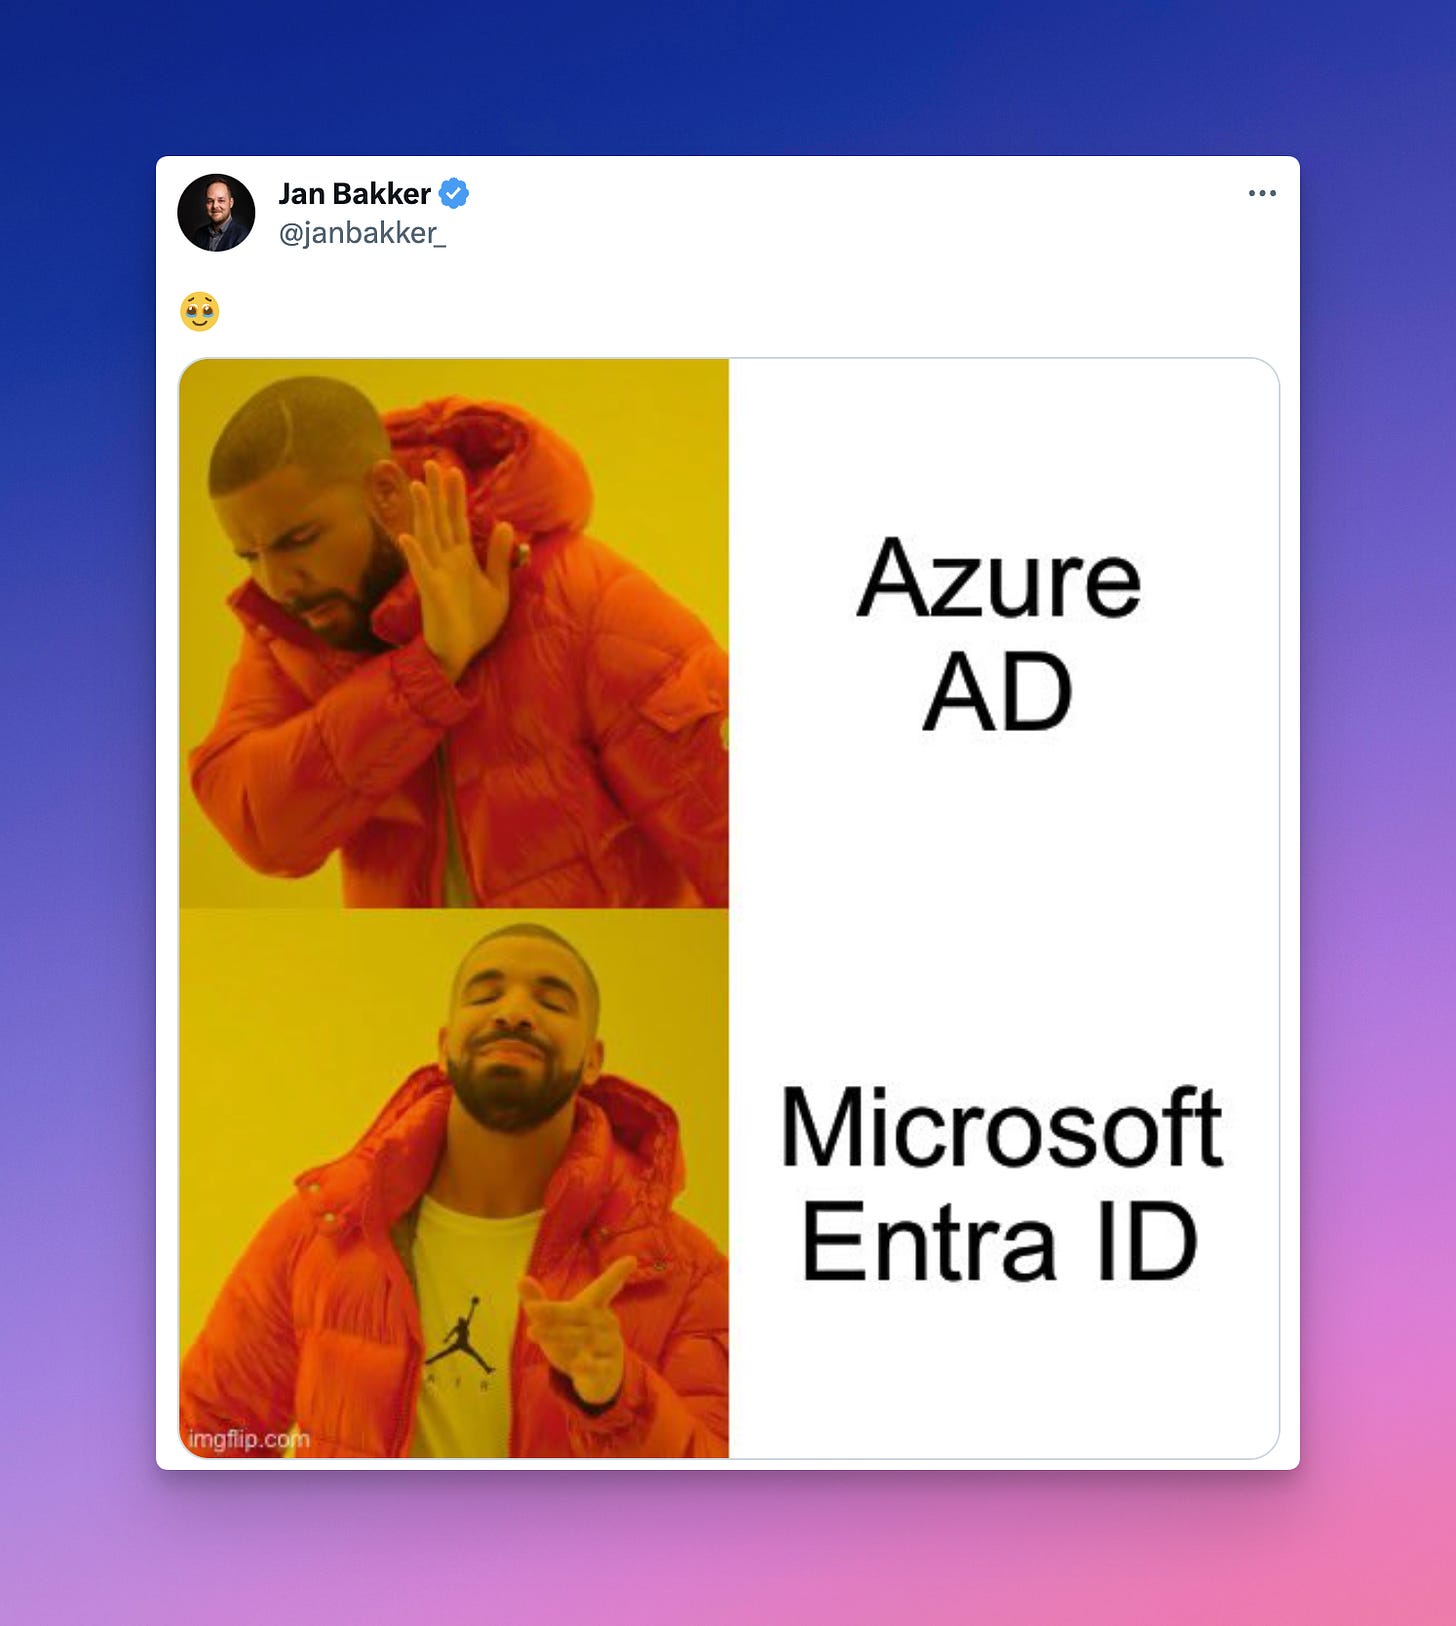 Pic of Drake meme showing Drake saying No for 'Azure AD' and showing Yes for 'Microsoft Entra ID'